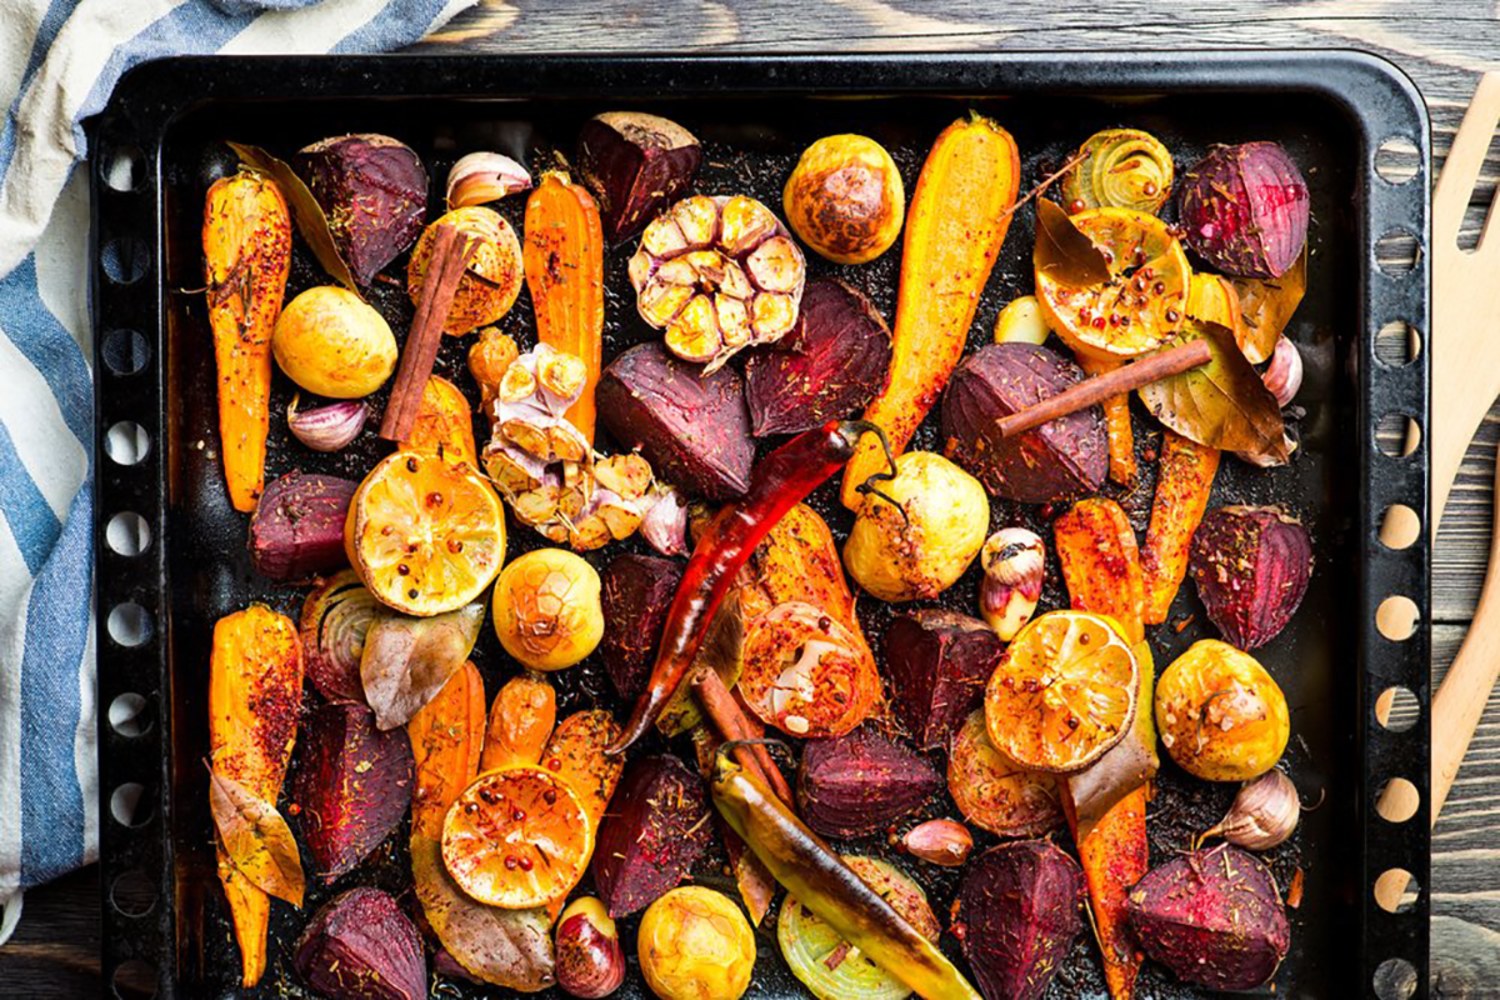 https://media-cldnry.s-nbcnews.com/image/upload/t_fit-1500w,f_auto,q_auto:best/newscms/2018_04/2301561/180122-better-roasted-vegetables-se-520p.jpg